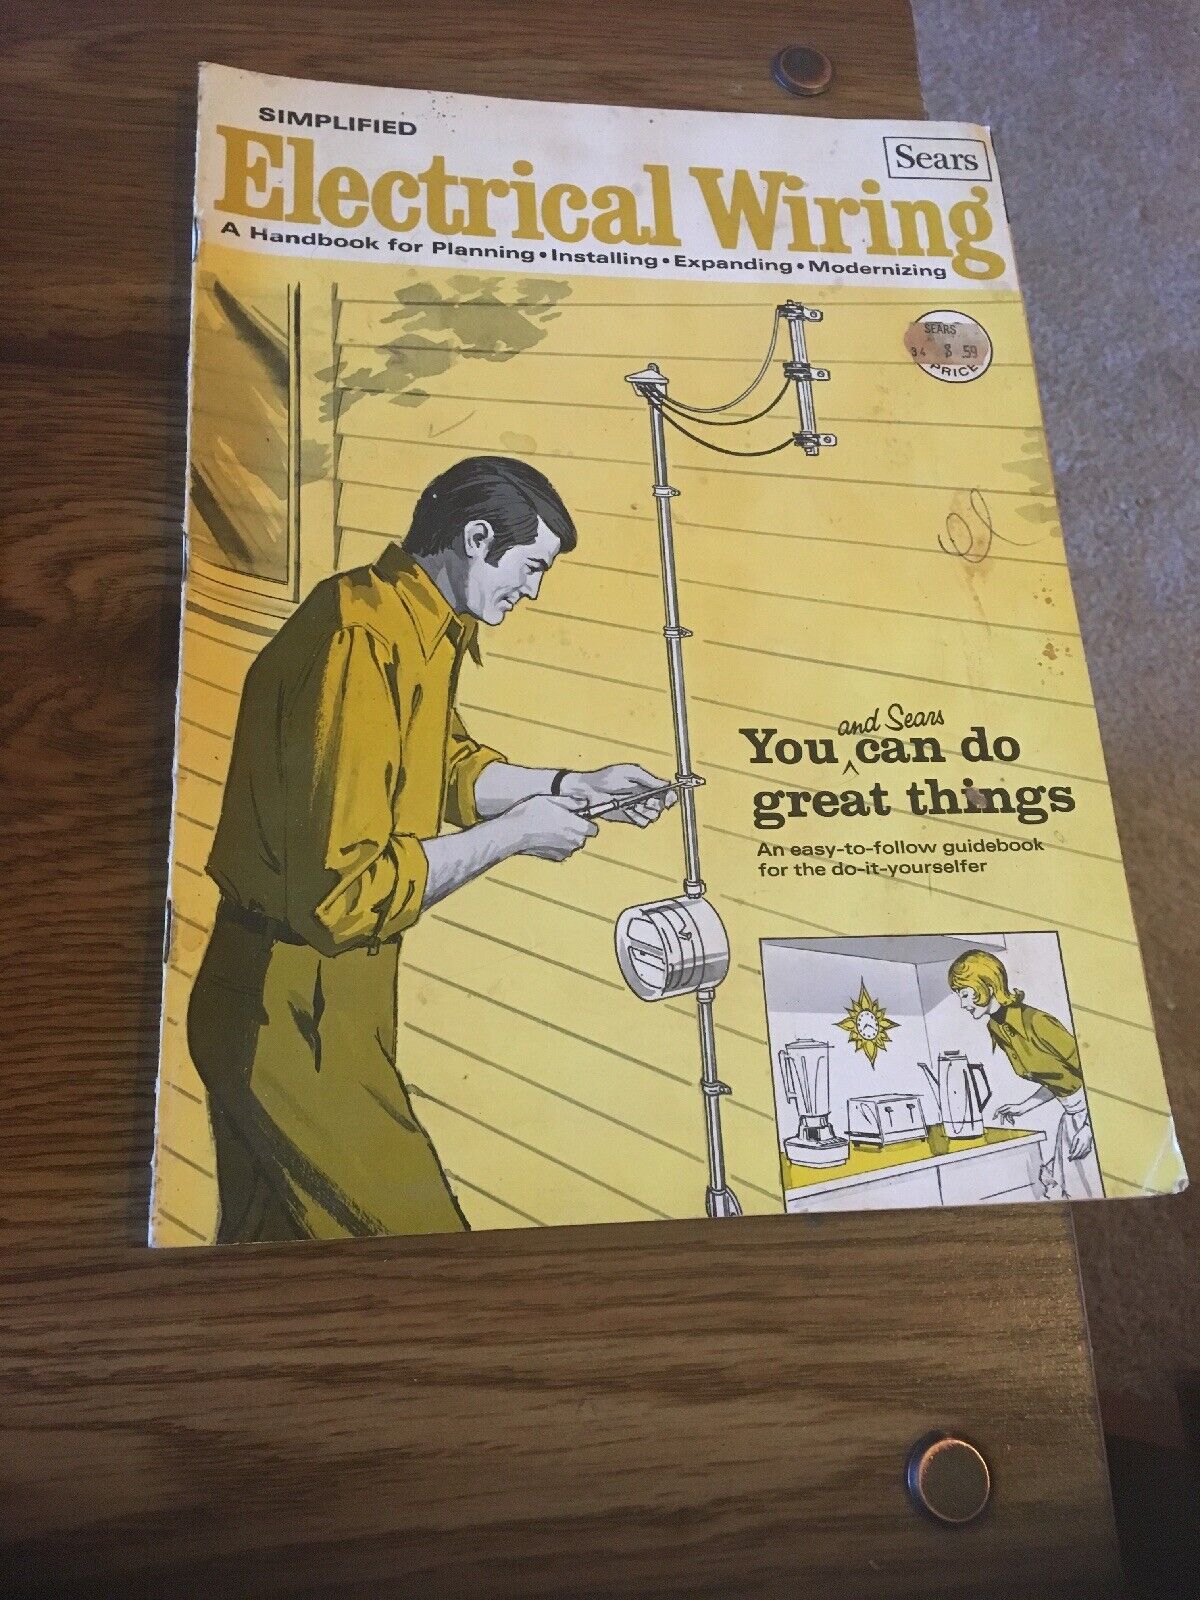 SEARS Simplified Electrical wiring Handbook 1969 you & Sears can do great things